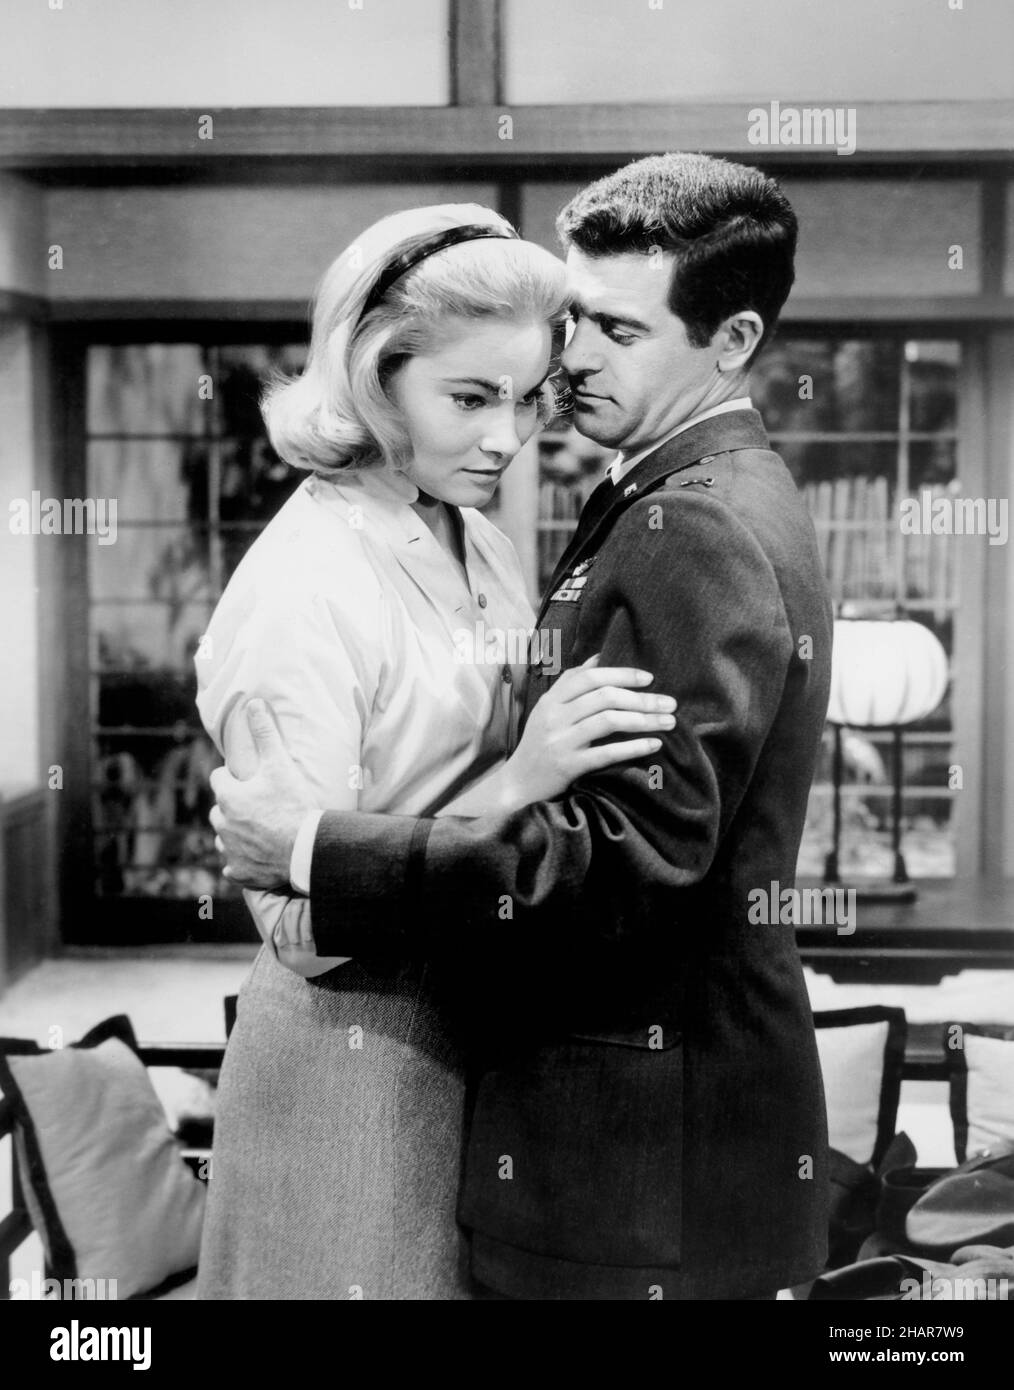 May Britt, Richard Egan, two people, man, male, woman, female, adults, Caucasian ethnicity, portrait, actor, actress, celebrity, entertainment, movie star, famous person, movies, film, 20th Century-Fox, The Hunters, 1958, 1950-1959, 1950's, 20th century, photography, historical, vintage, retro, black & white, b&w, b/w, vertical, GHIV Stock Photo